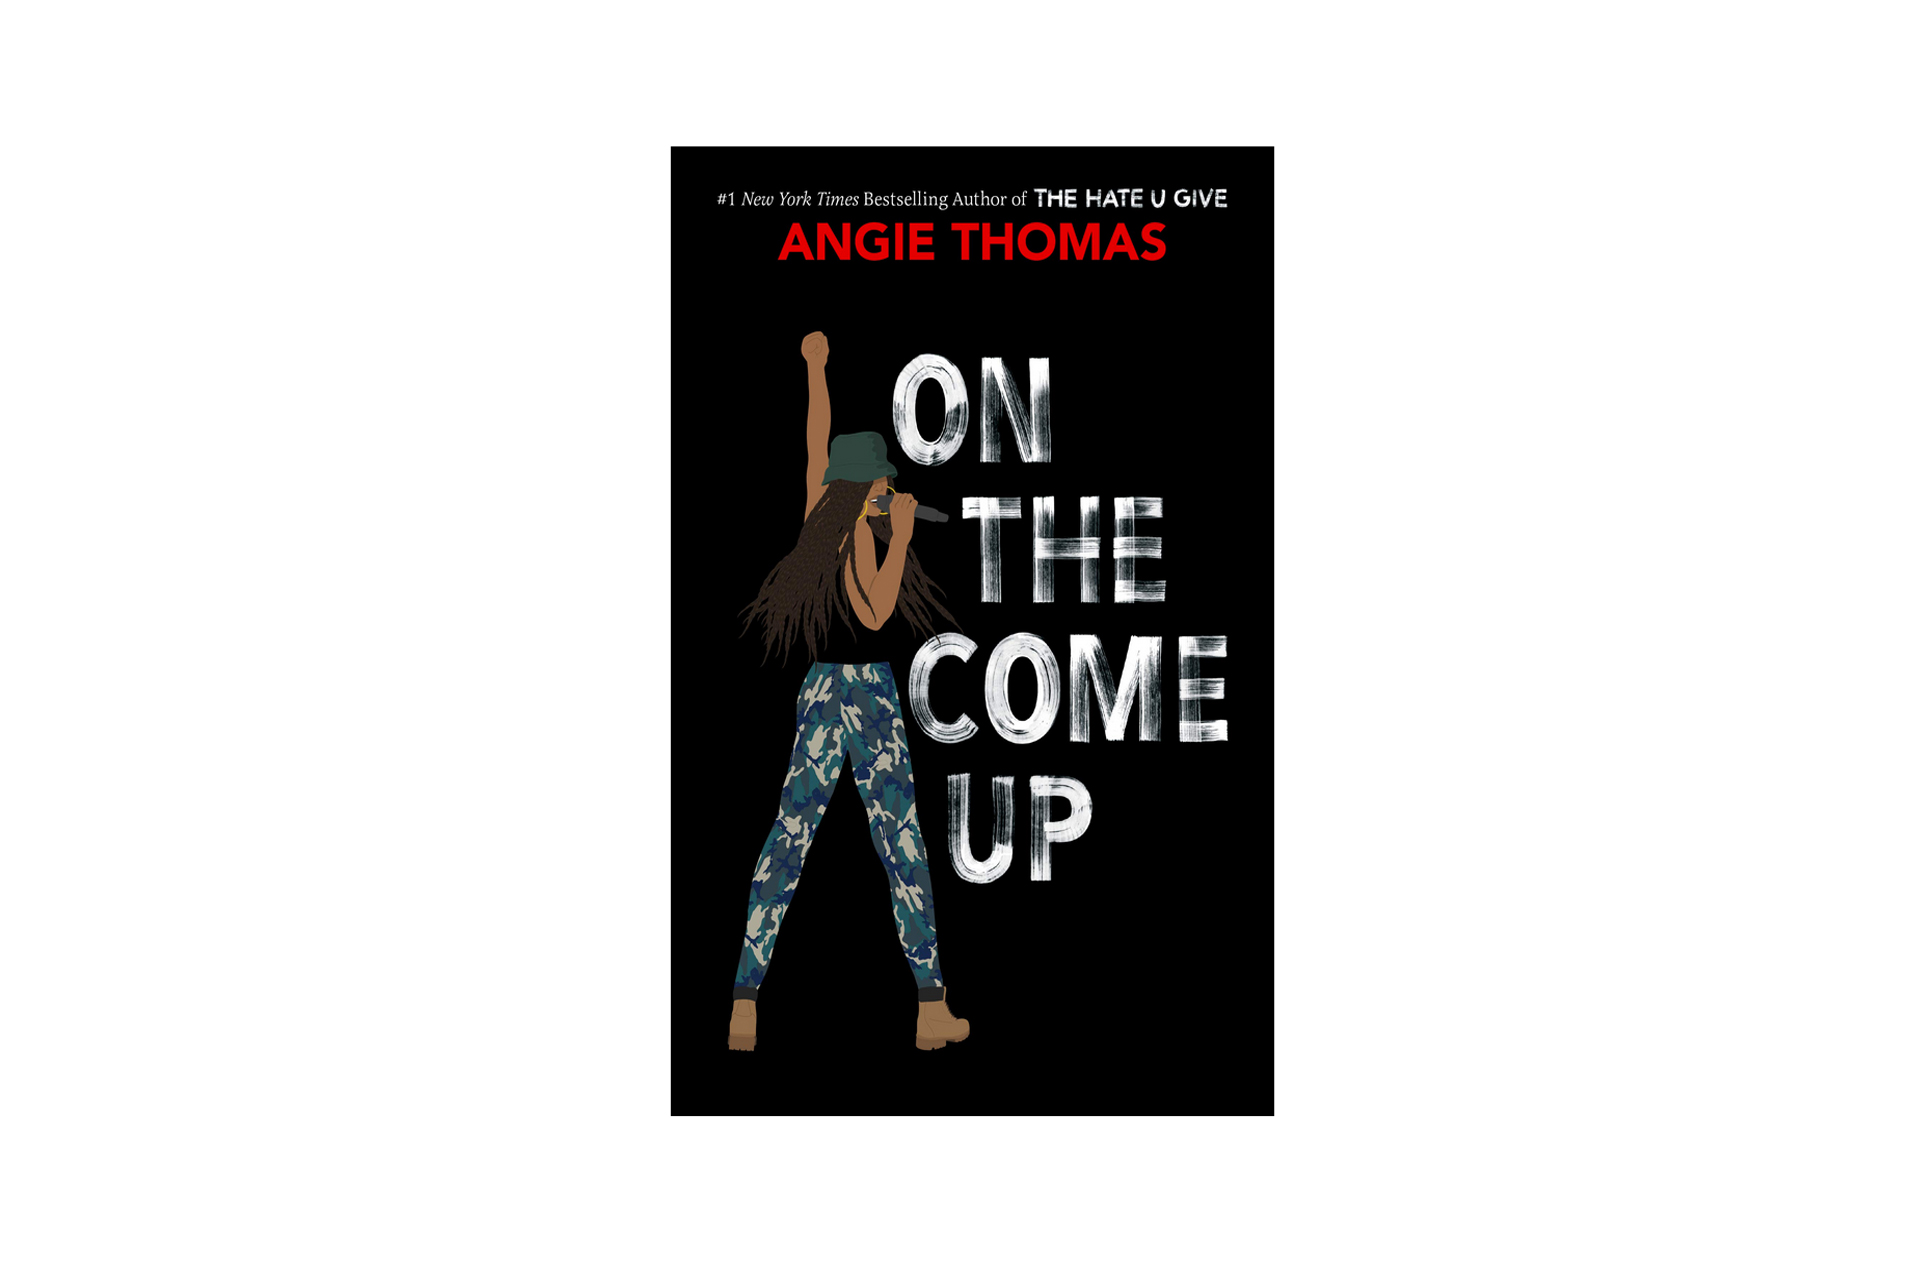 On the Come Up Book; Courtesy of Amazon